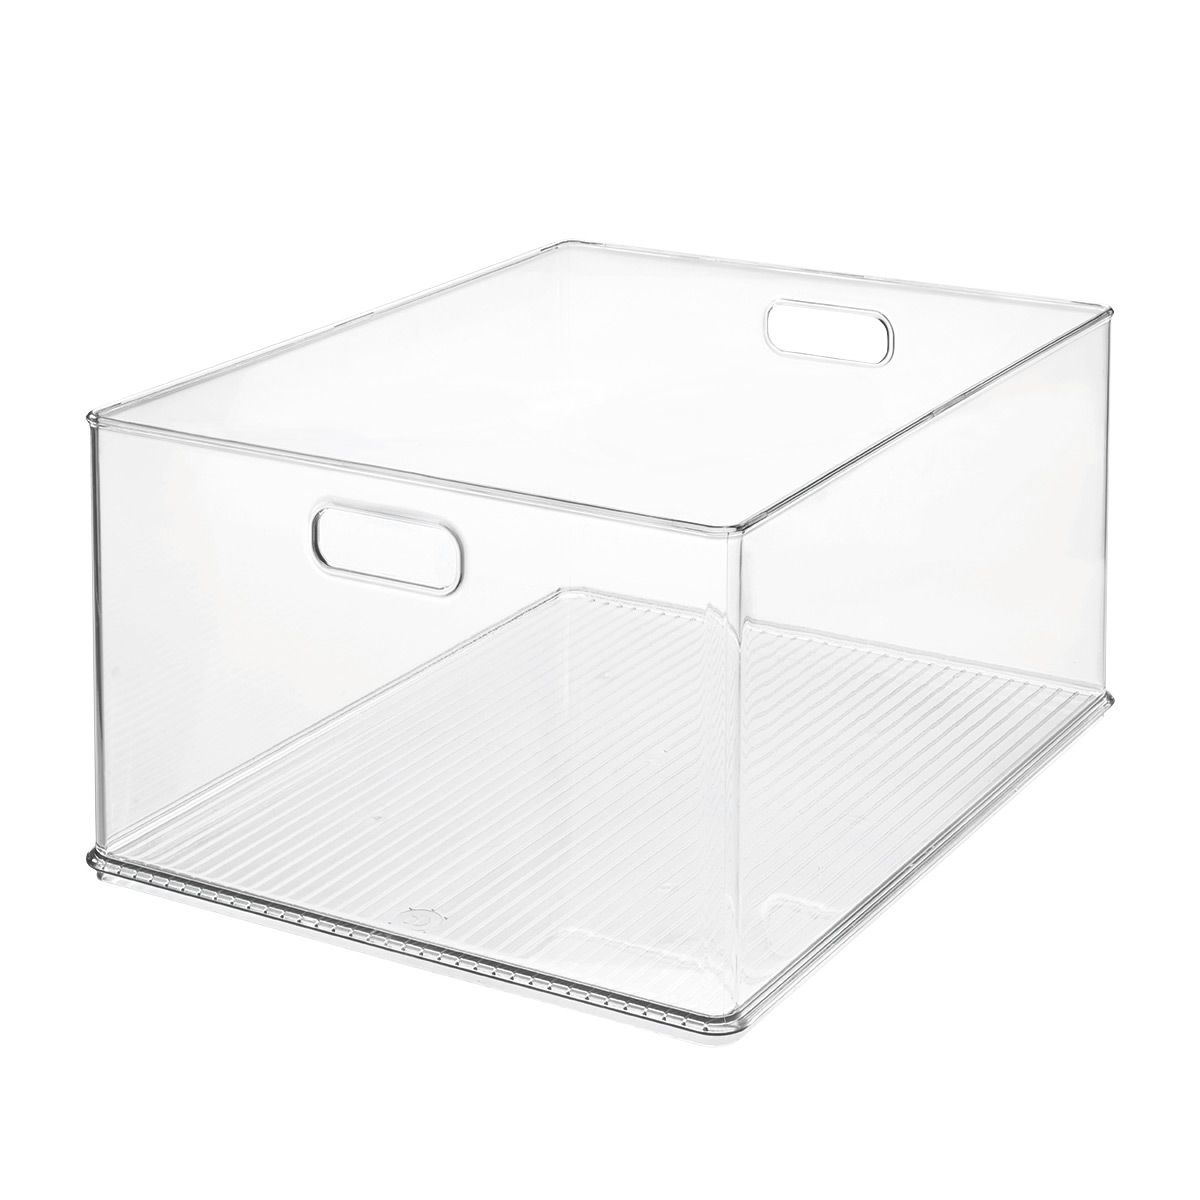 Stackable Closet Bin | The Container Store